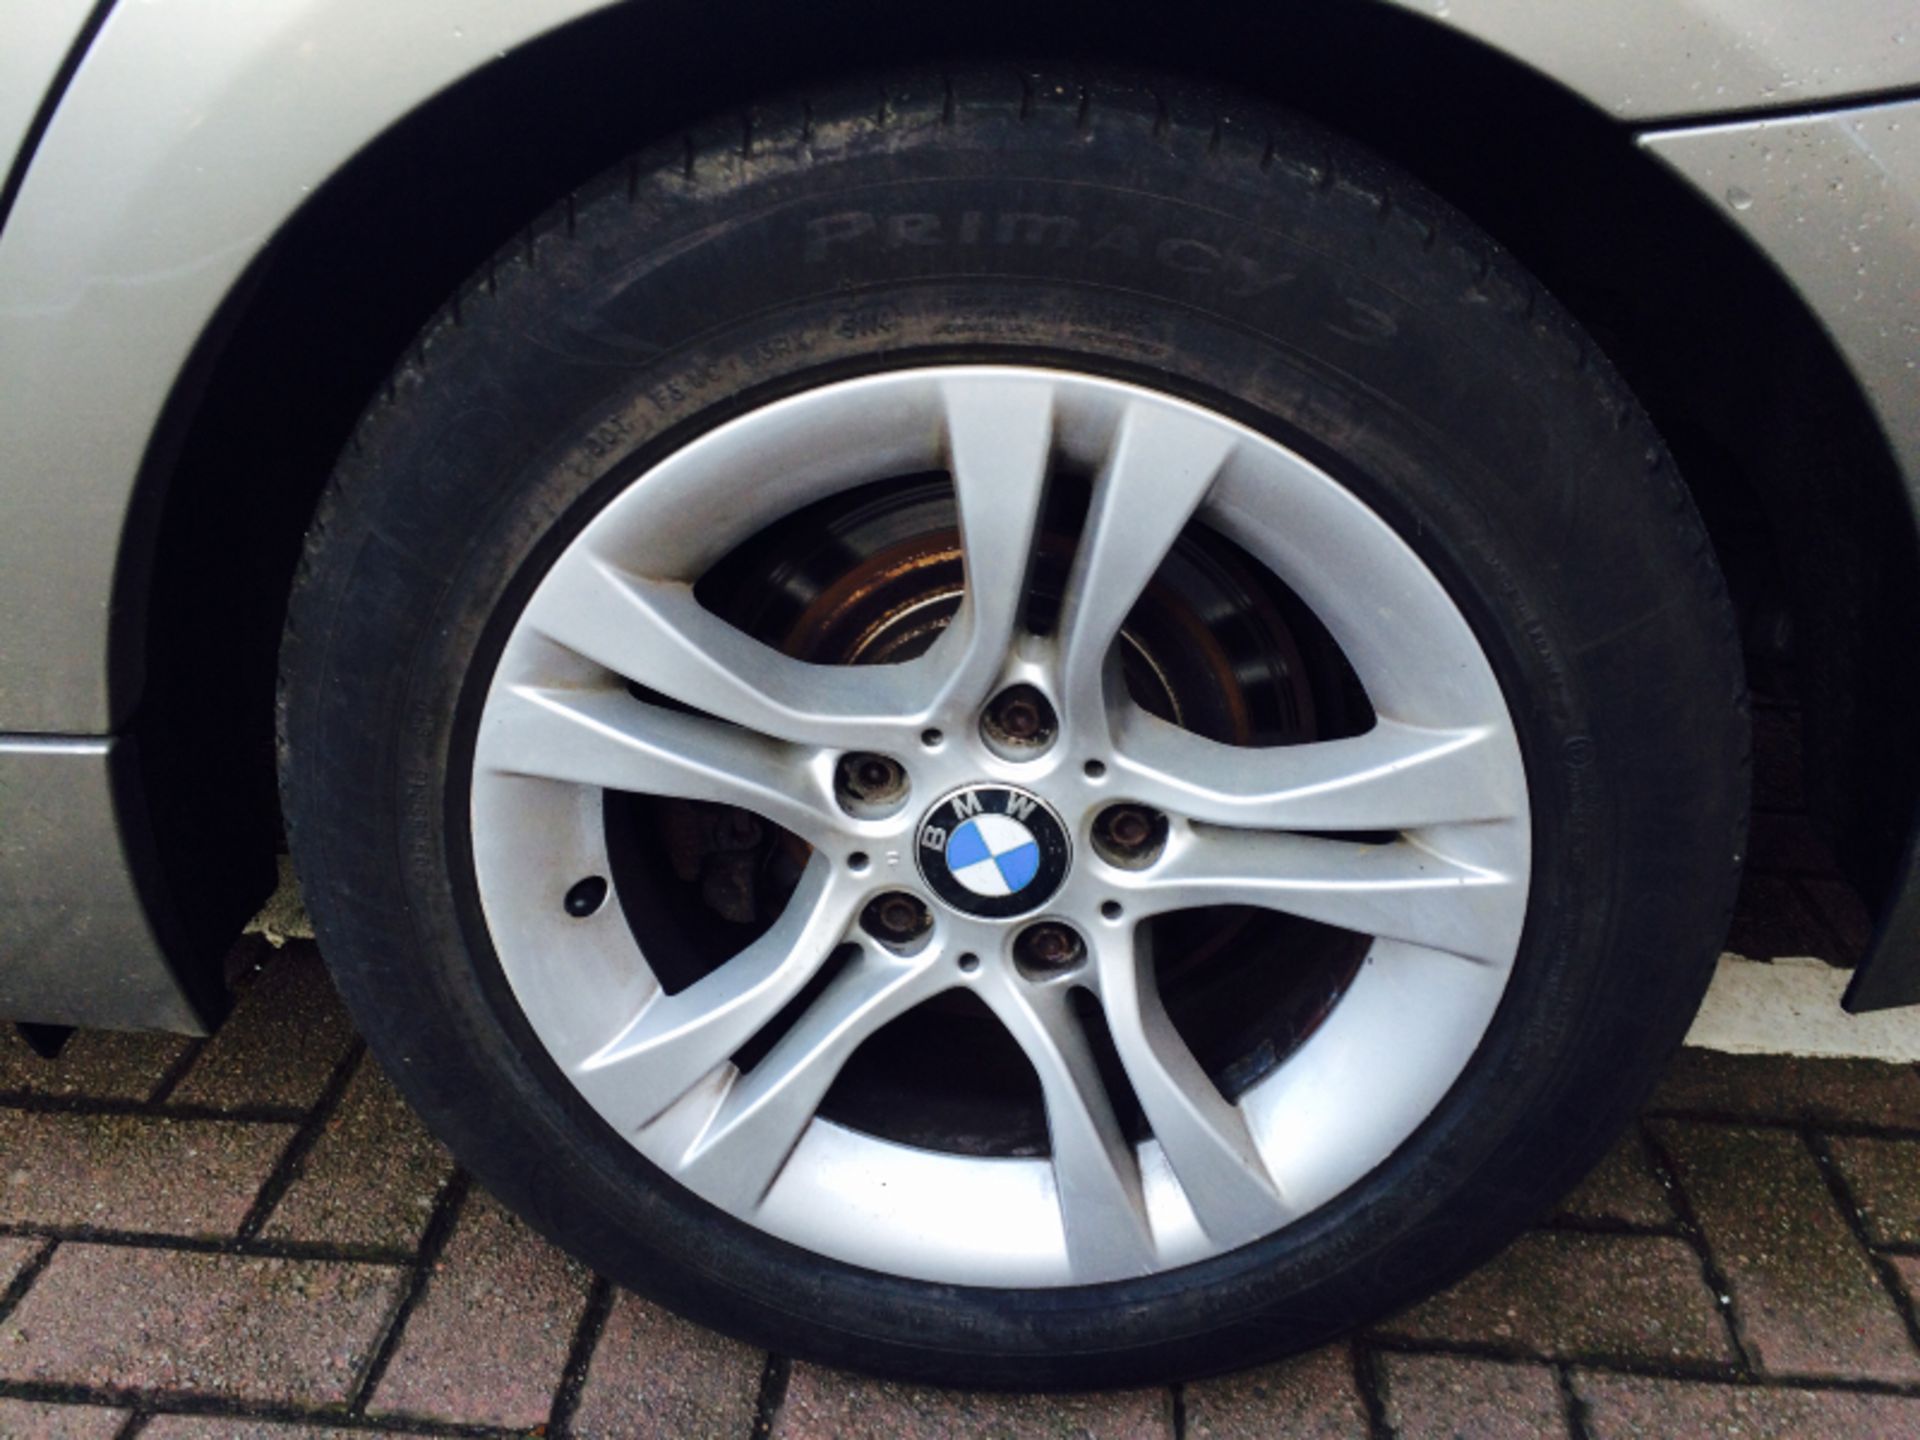 ON SALE ! BMW 318D DIESEL (2011 - 11 REG) 'SERVICE HISTORY BY BMW' START / STOP - AIR CON - EURO 5 - Image 6 of 15